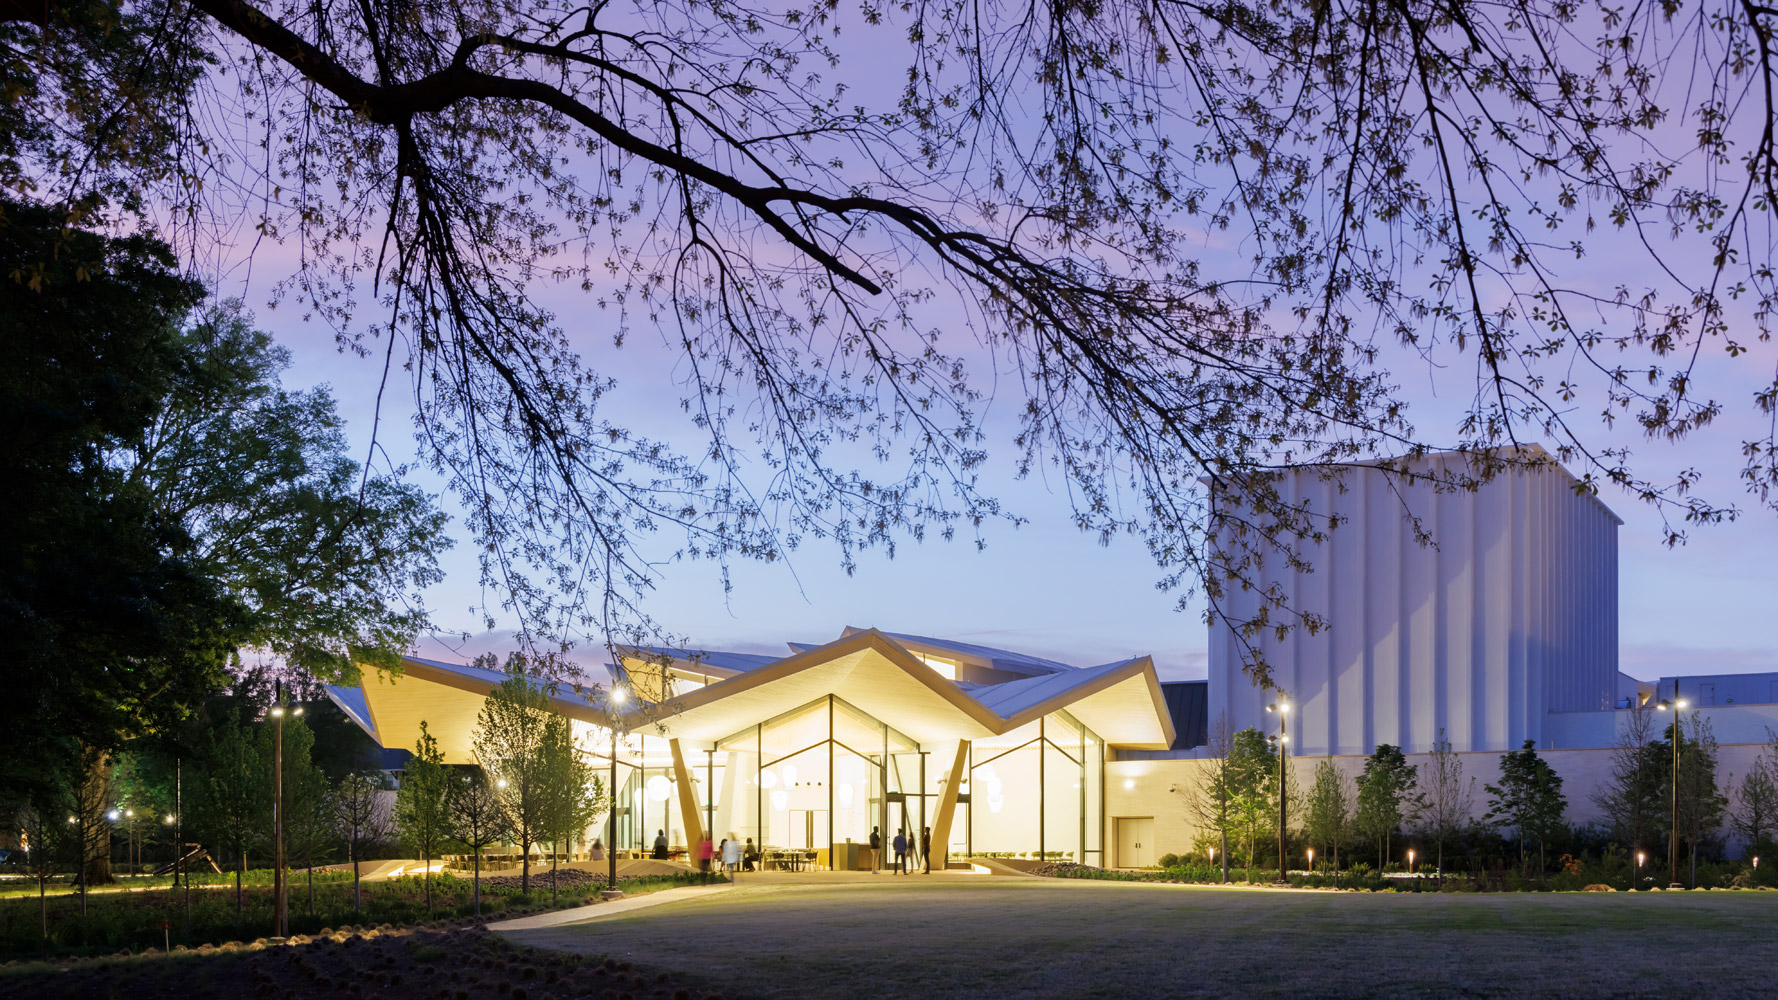 Studio Gang and SCAPE Integrate Old and New, Building and Nature, at the Arkansas Museum of Fine Arts